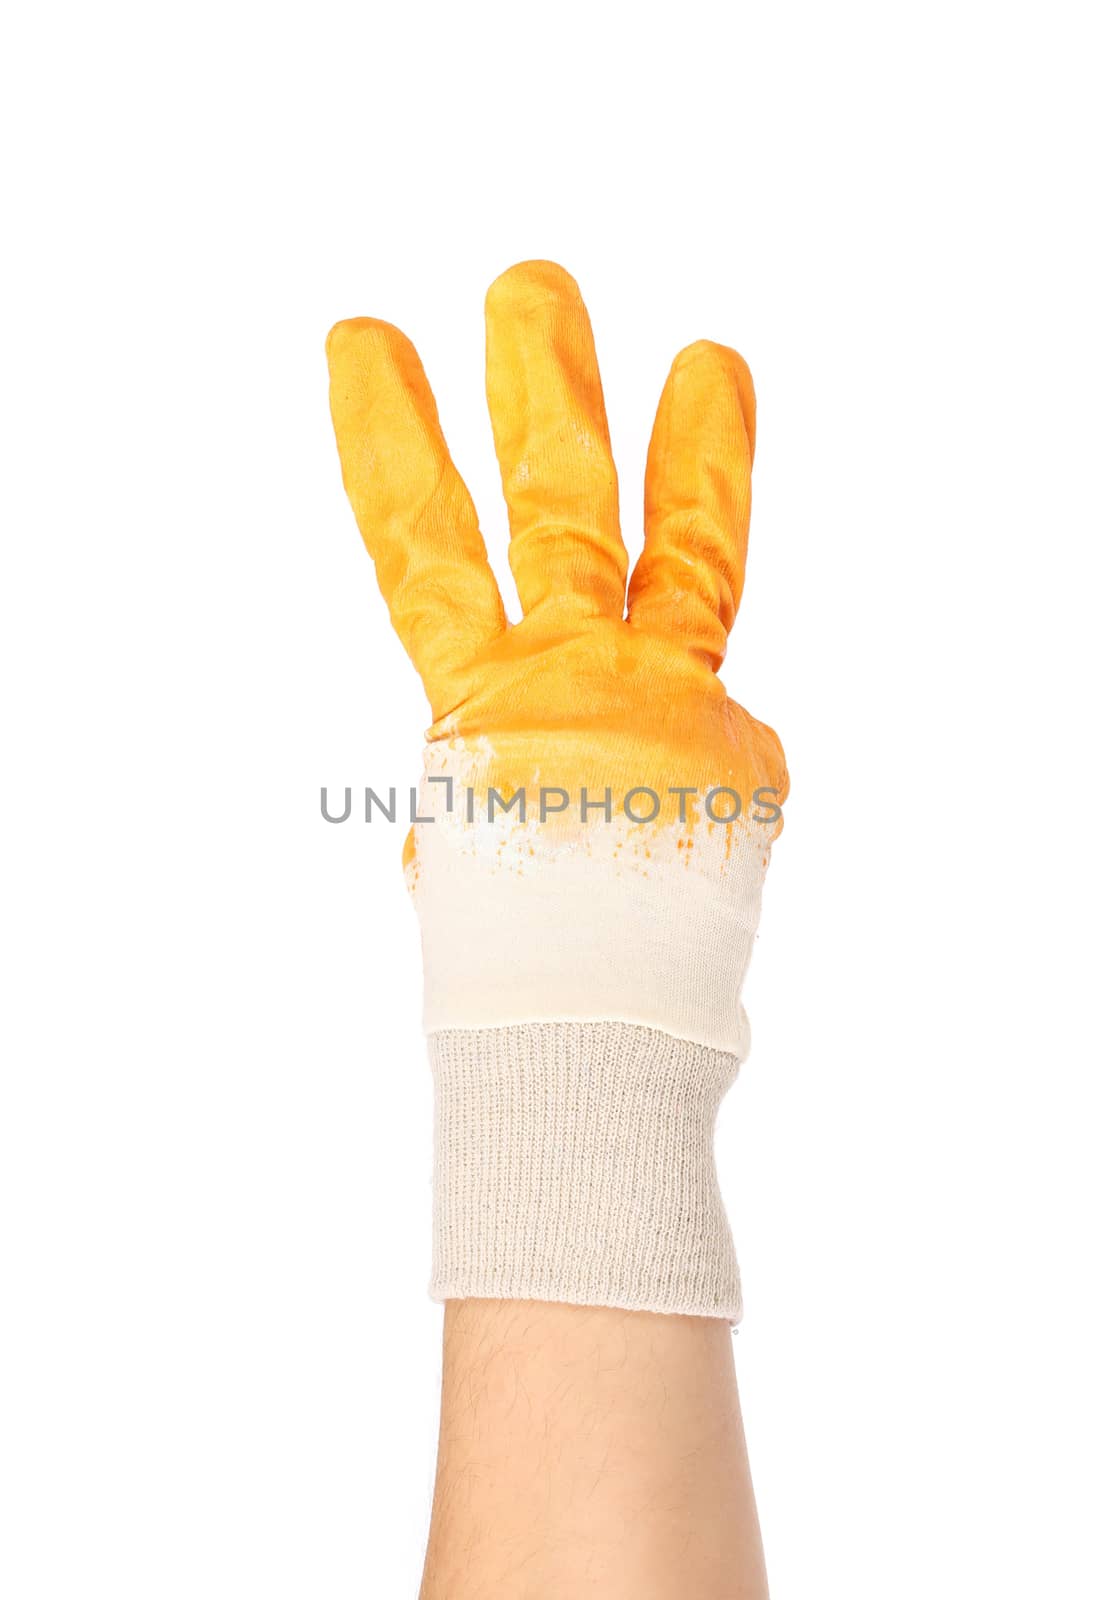 Hand in rubber glove shows three. by indigolotos